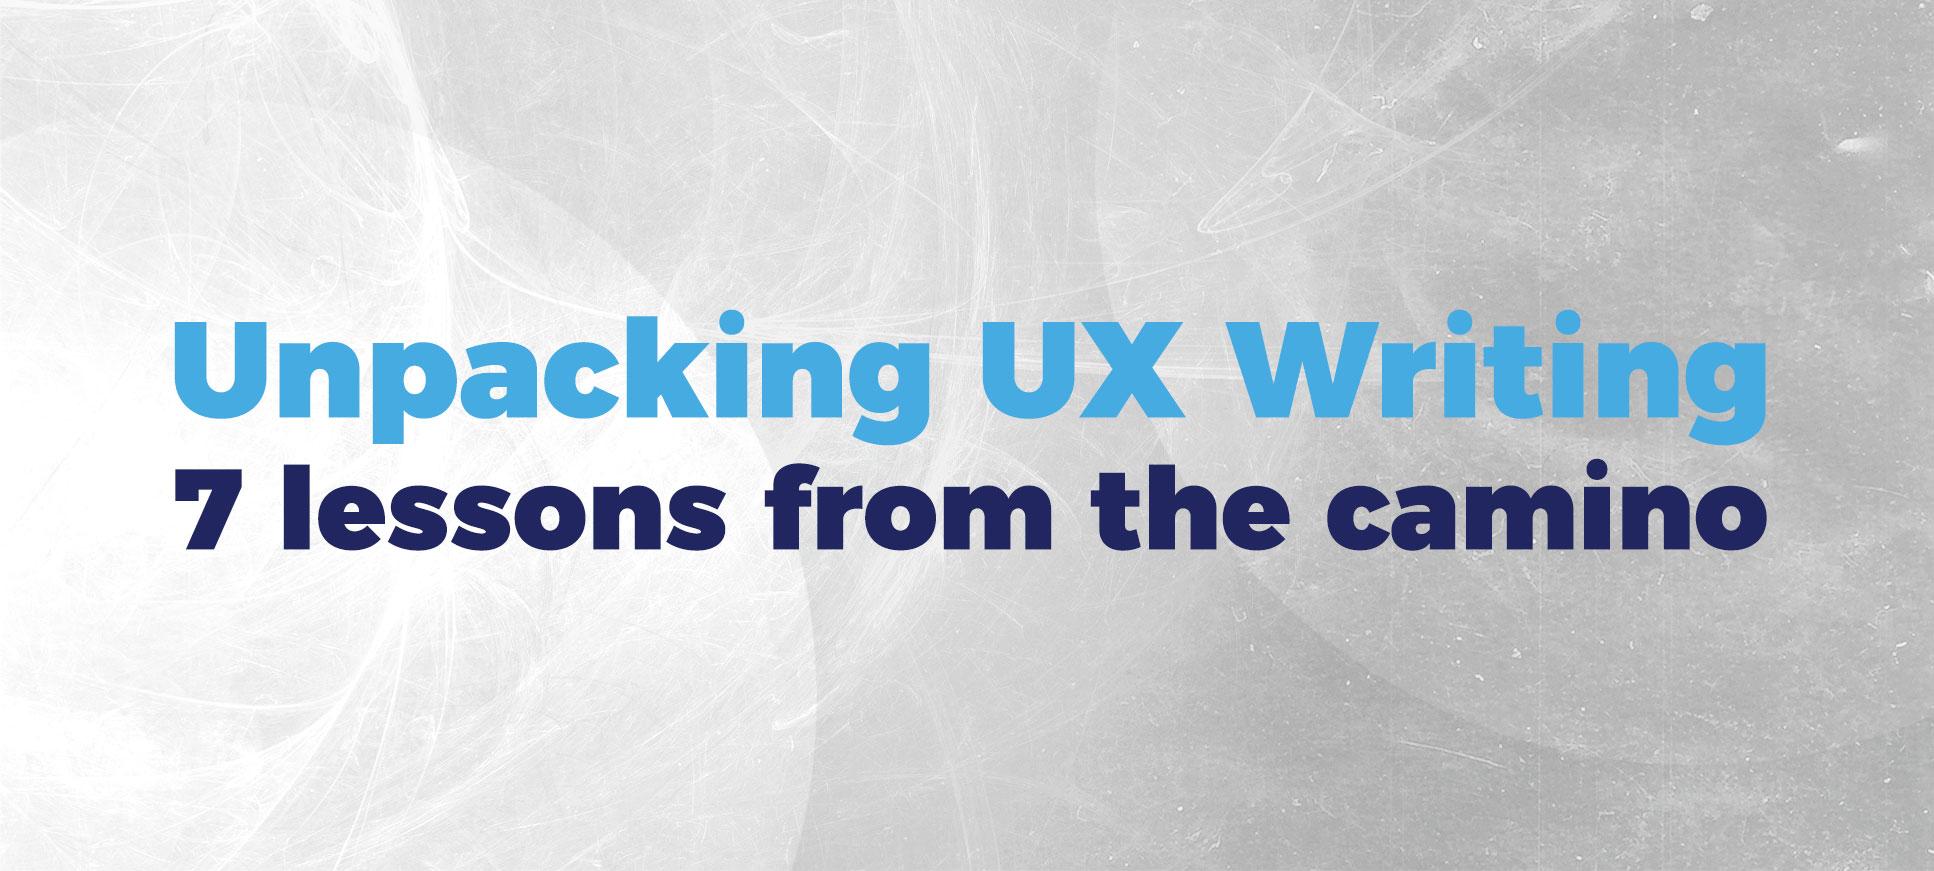 unpacking ux design-7 lessons from the camino